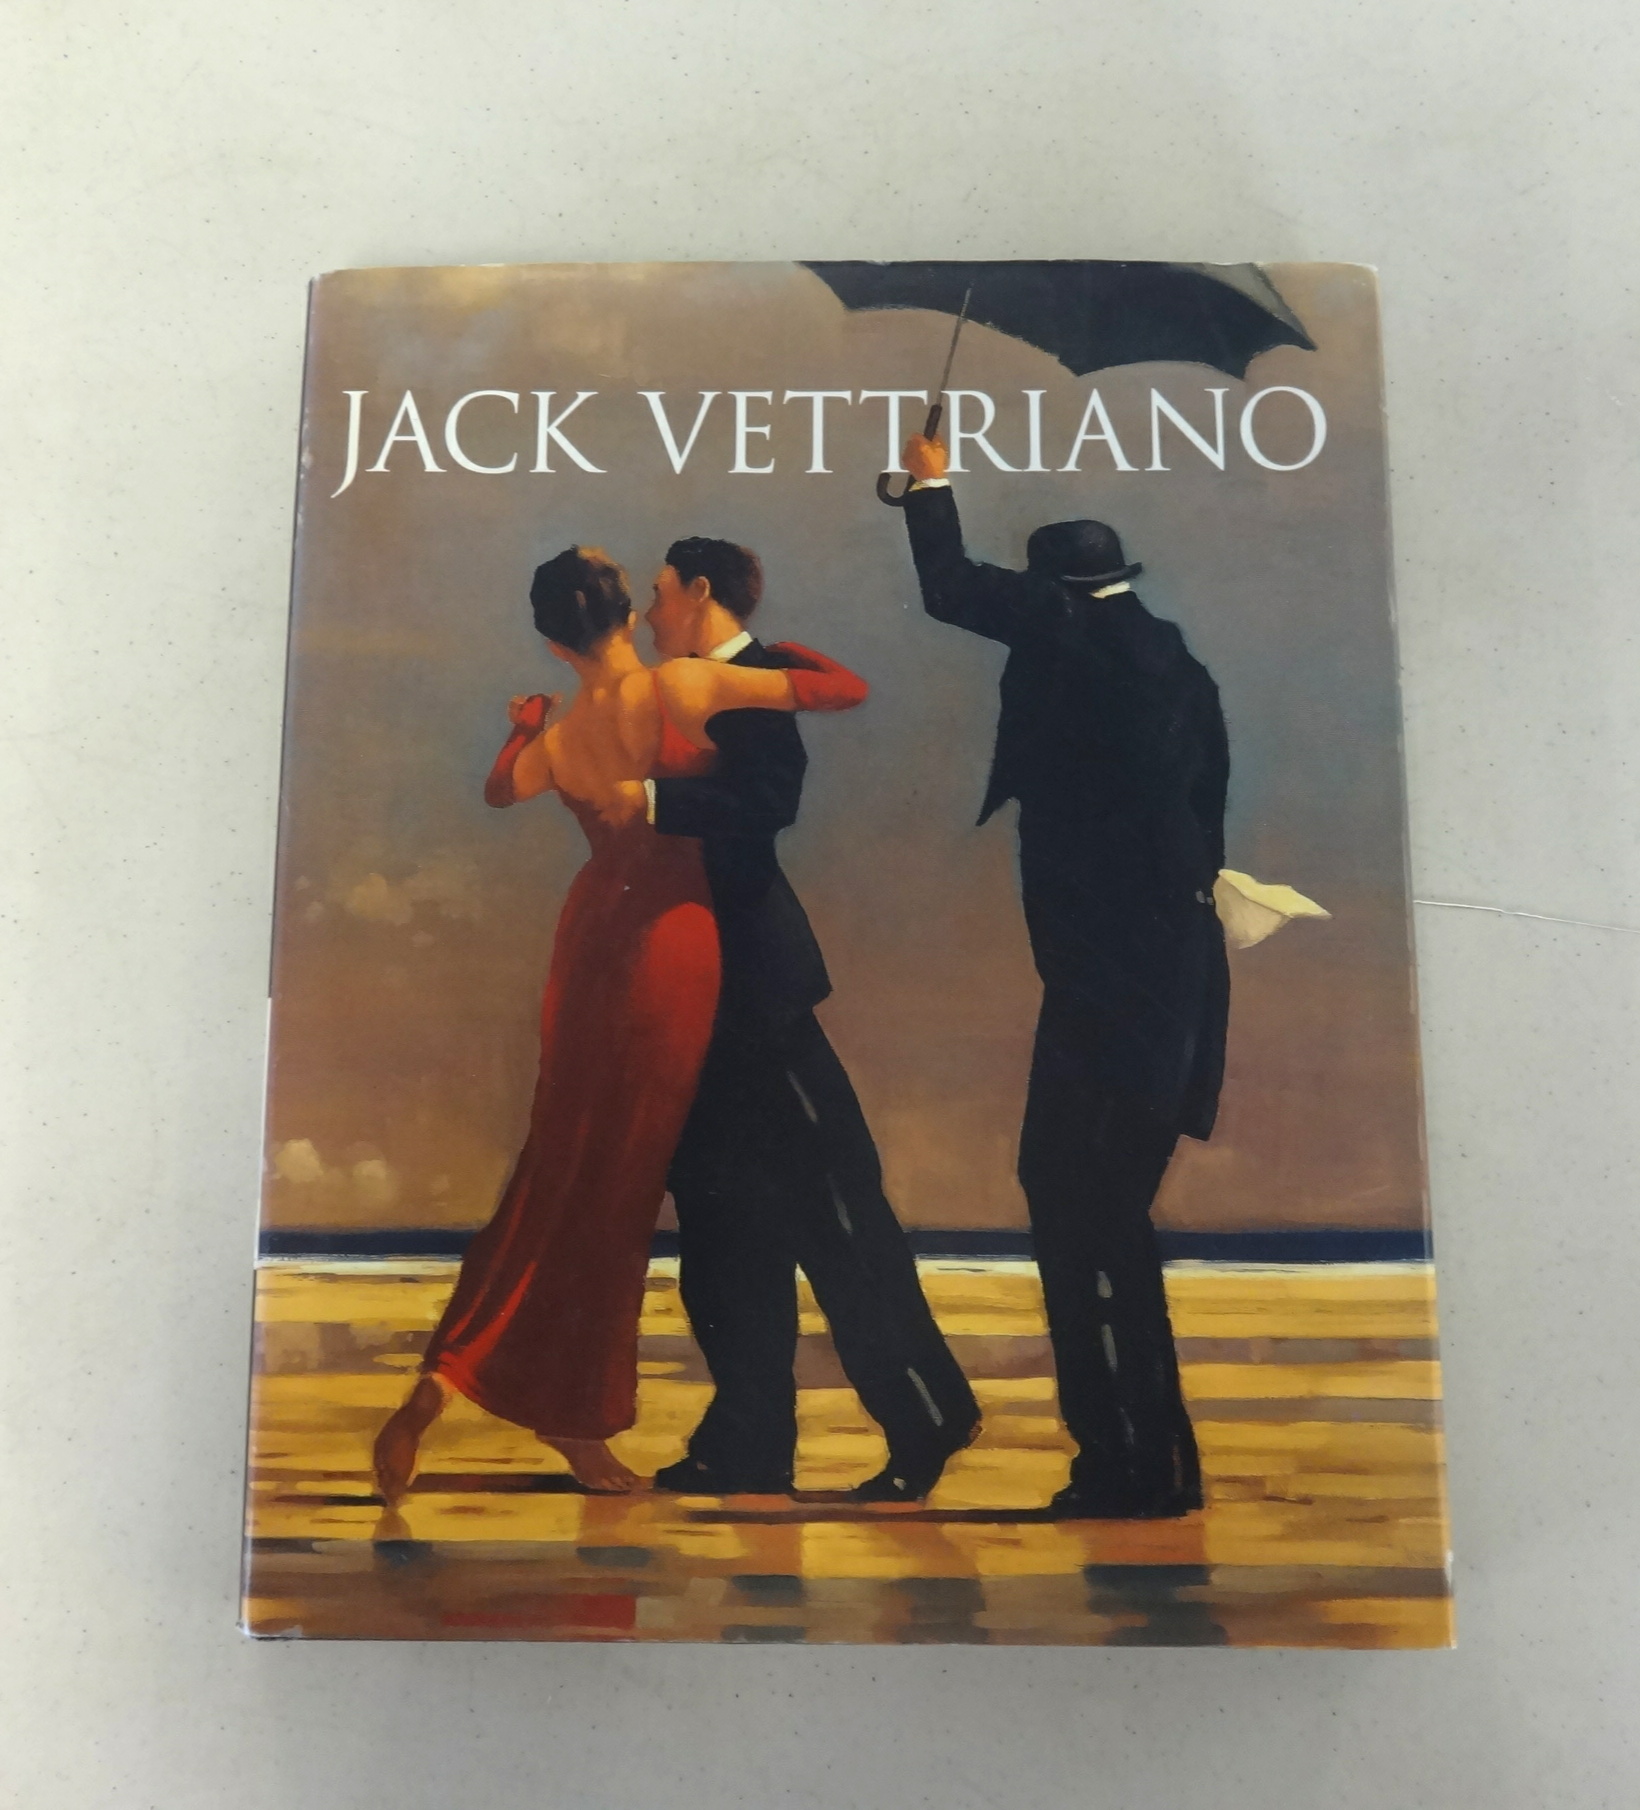 Jack Vettriano, poster from The Portland Gallery, 'The Waltzers', together with a signed copy of the - Image 2 of 3